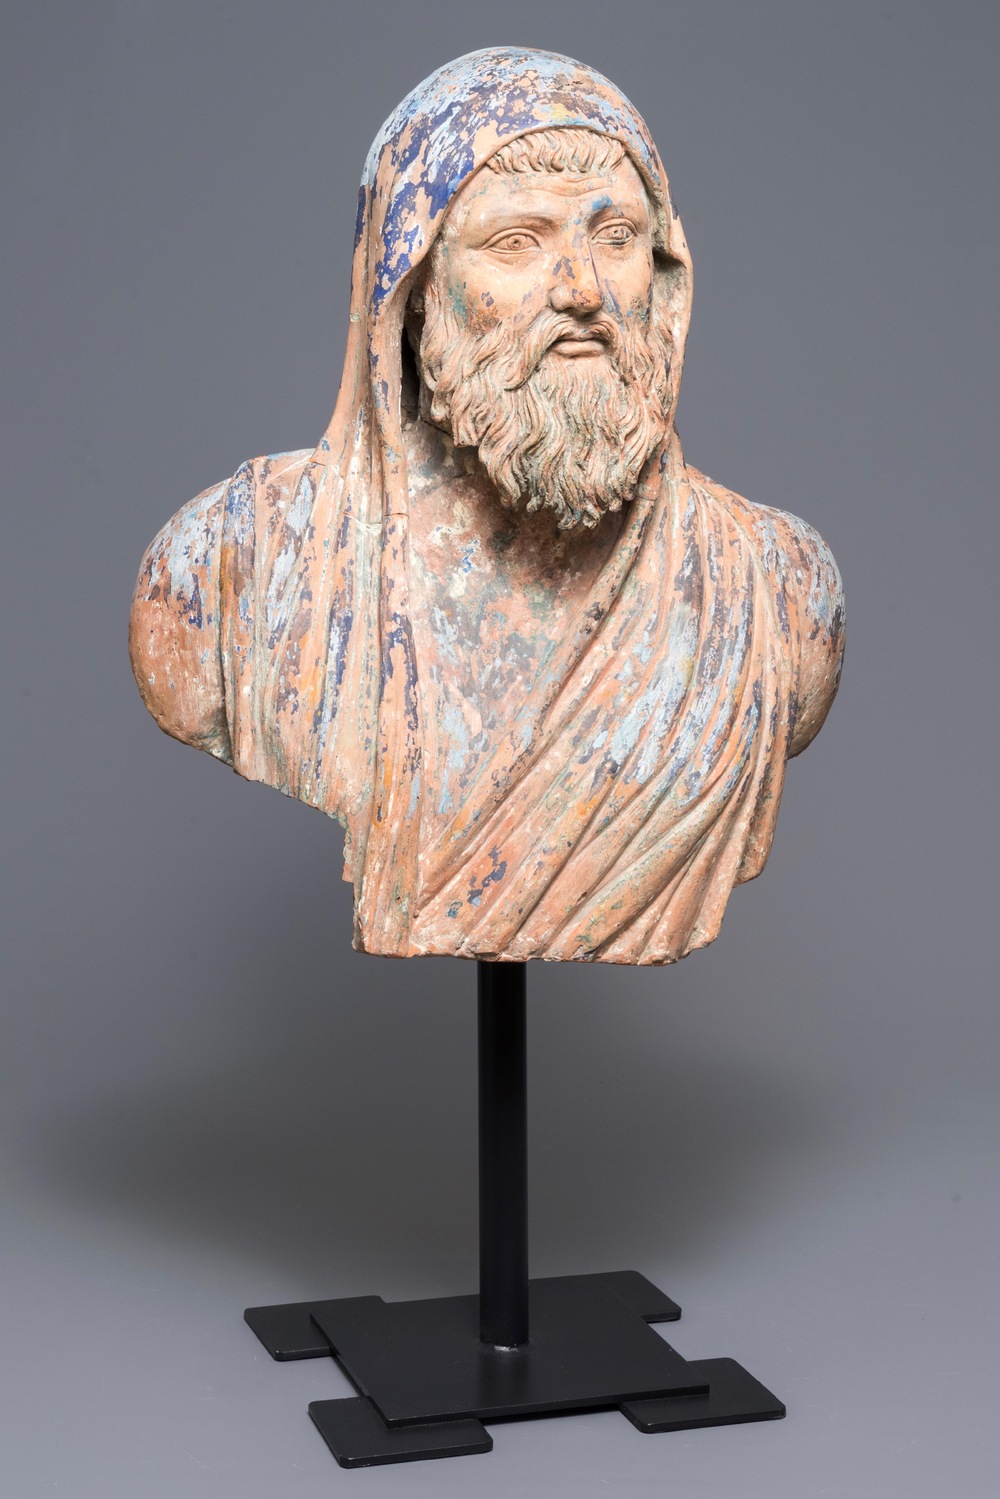 A terracotta bust 'after the antique', Italy, 17/18th C.